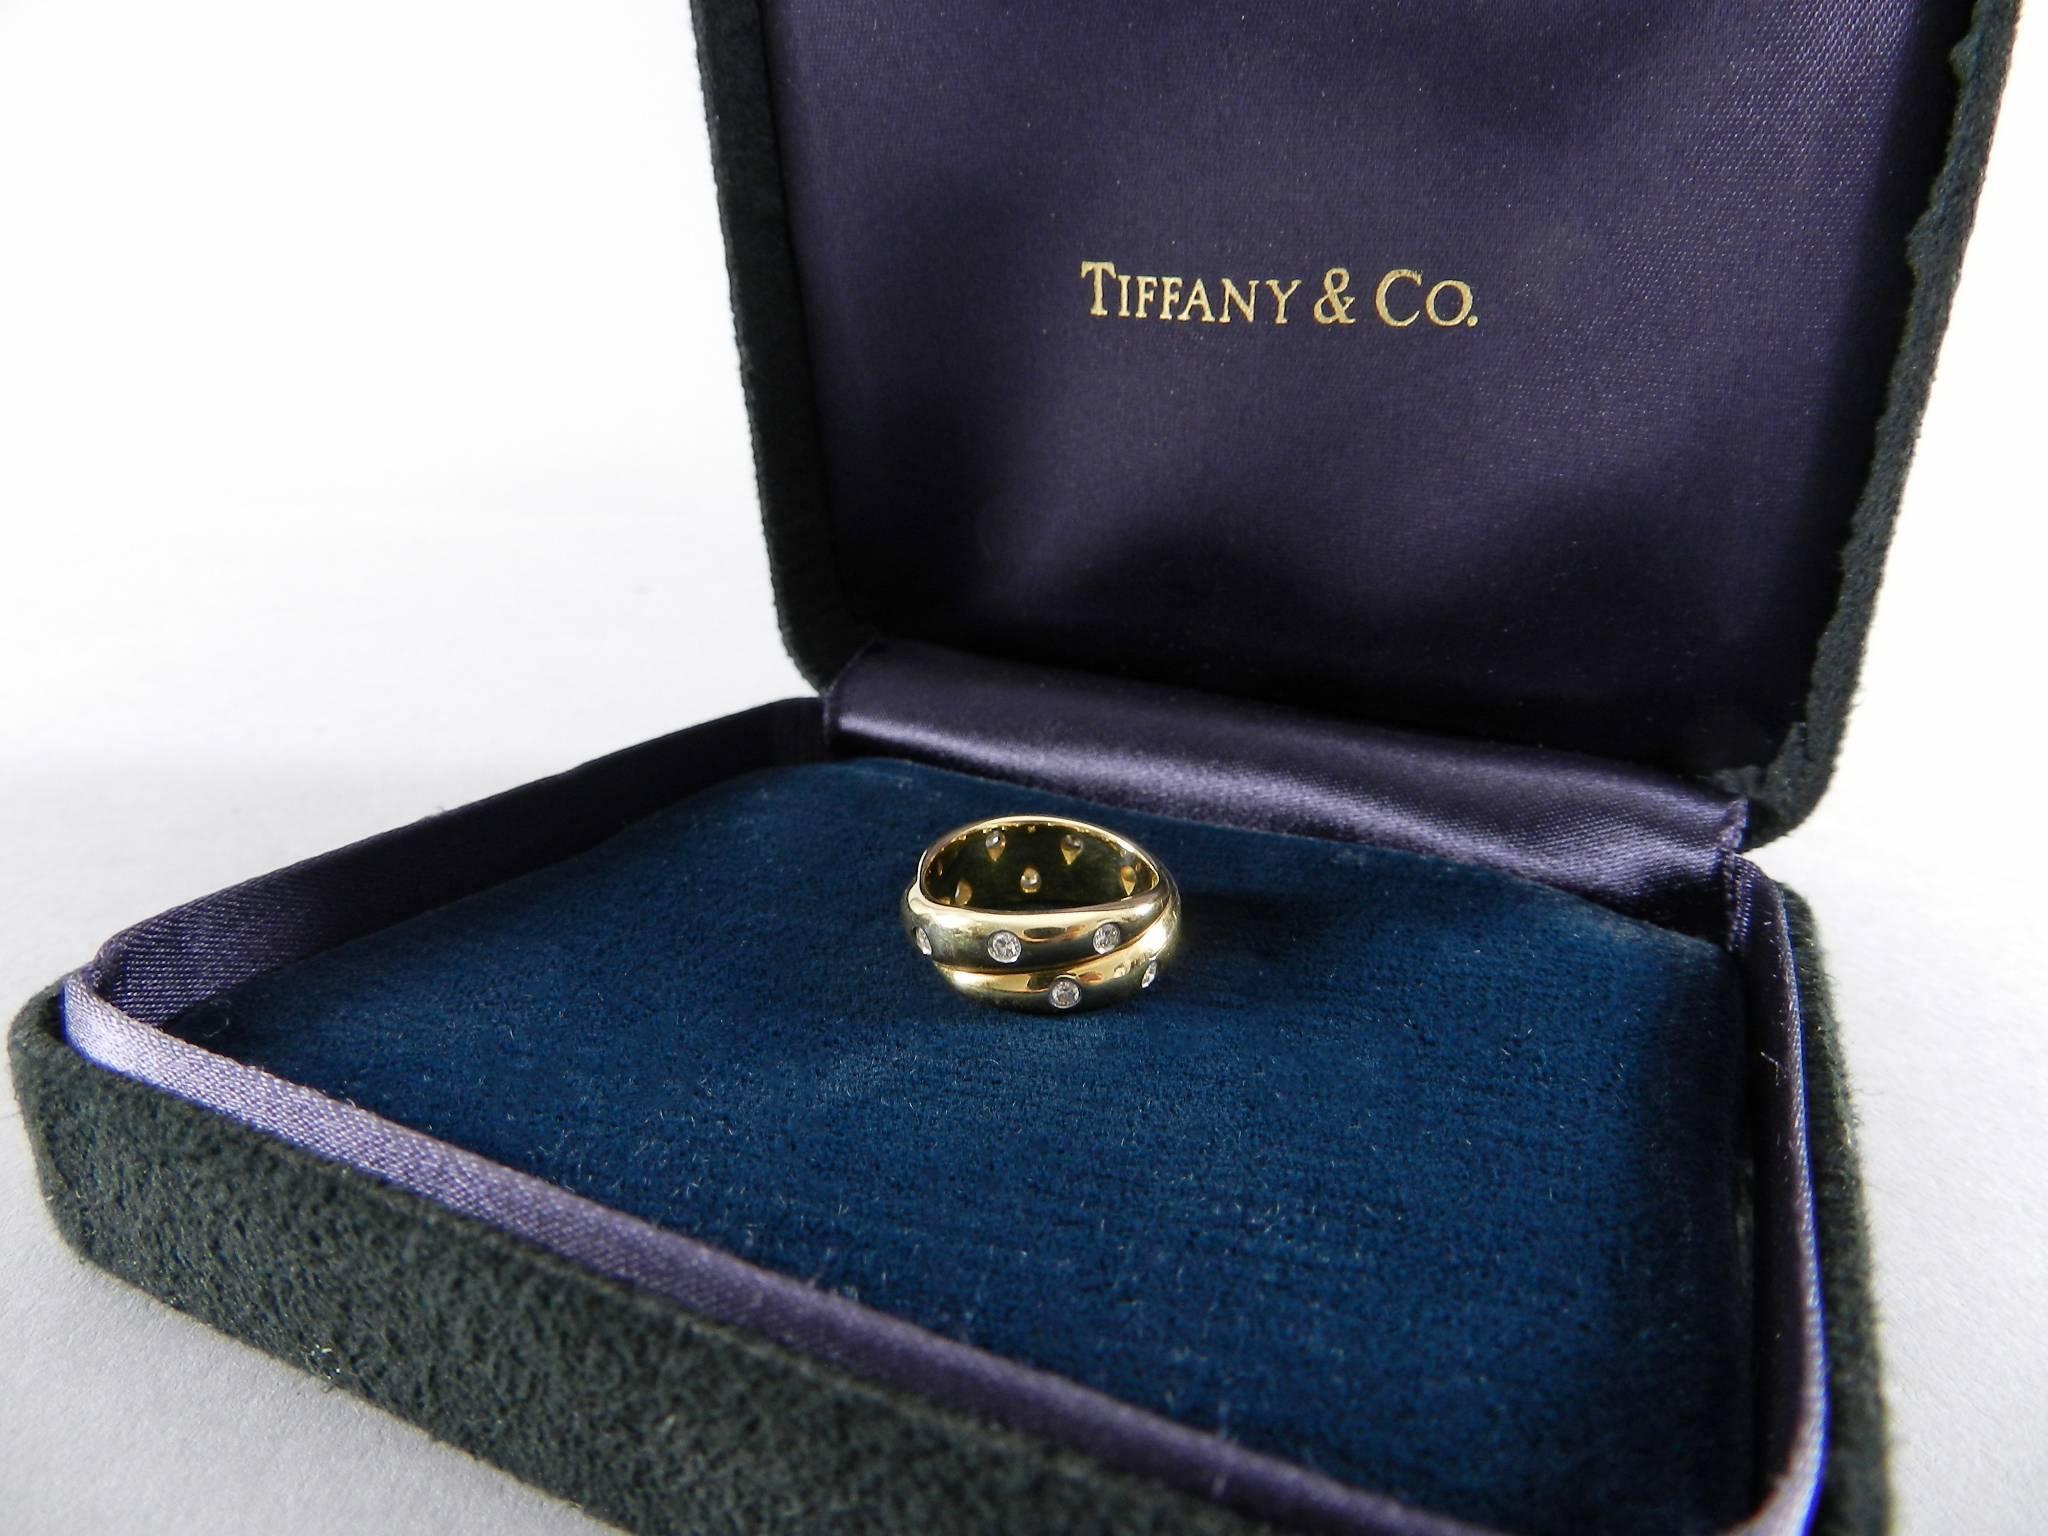 Tiffany and Co. 18k yellow gold and 950 platinum double band ring. Has 12 diamonds. Excellent pre-owned condition. Includes box. Ring size 6.

We ship worldwide.